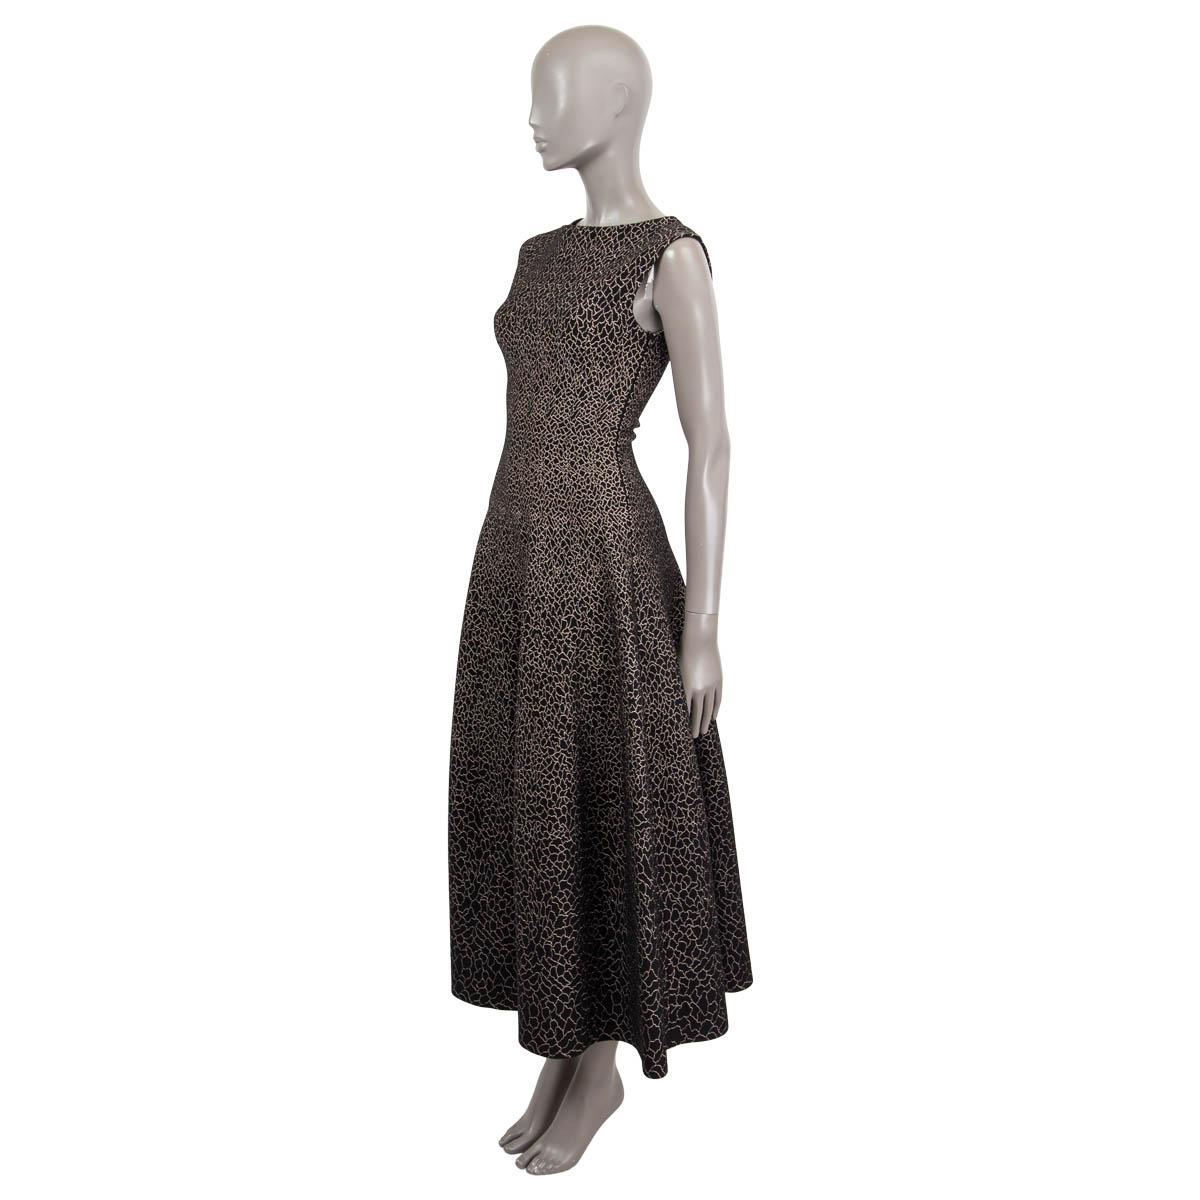 100% authentic Alaia sleeveless lurex maxi dress in black and gold viscose (36%), wool (34%), polyester (13%), metal (9%), nylon (6%) and elastane (2%). Opens with a concealed zipper on the side. Unlined. Has been worn once and is in virtually new